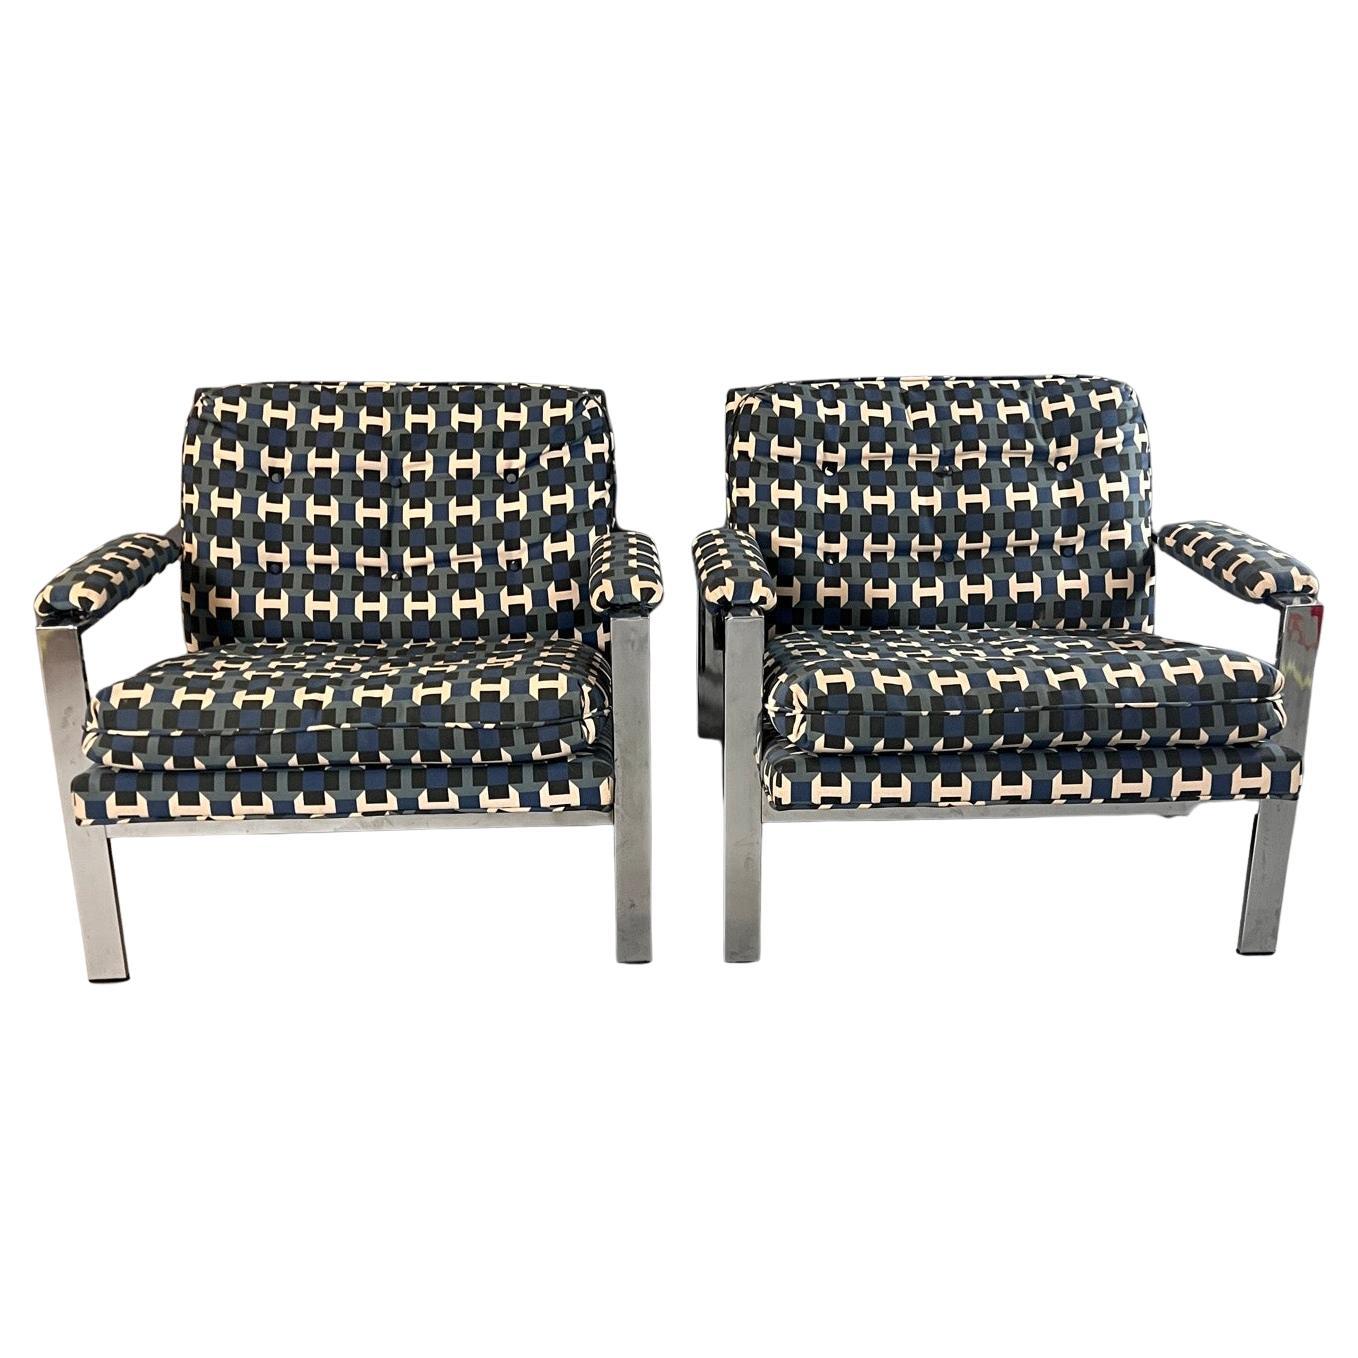 Stunning Pair of Chrome Flat Bar Lounge Chairs in Hermes Upholstery For Sale